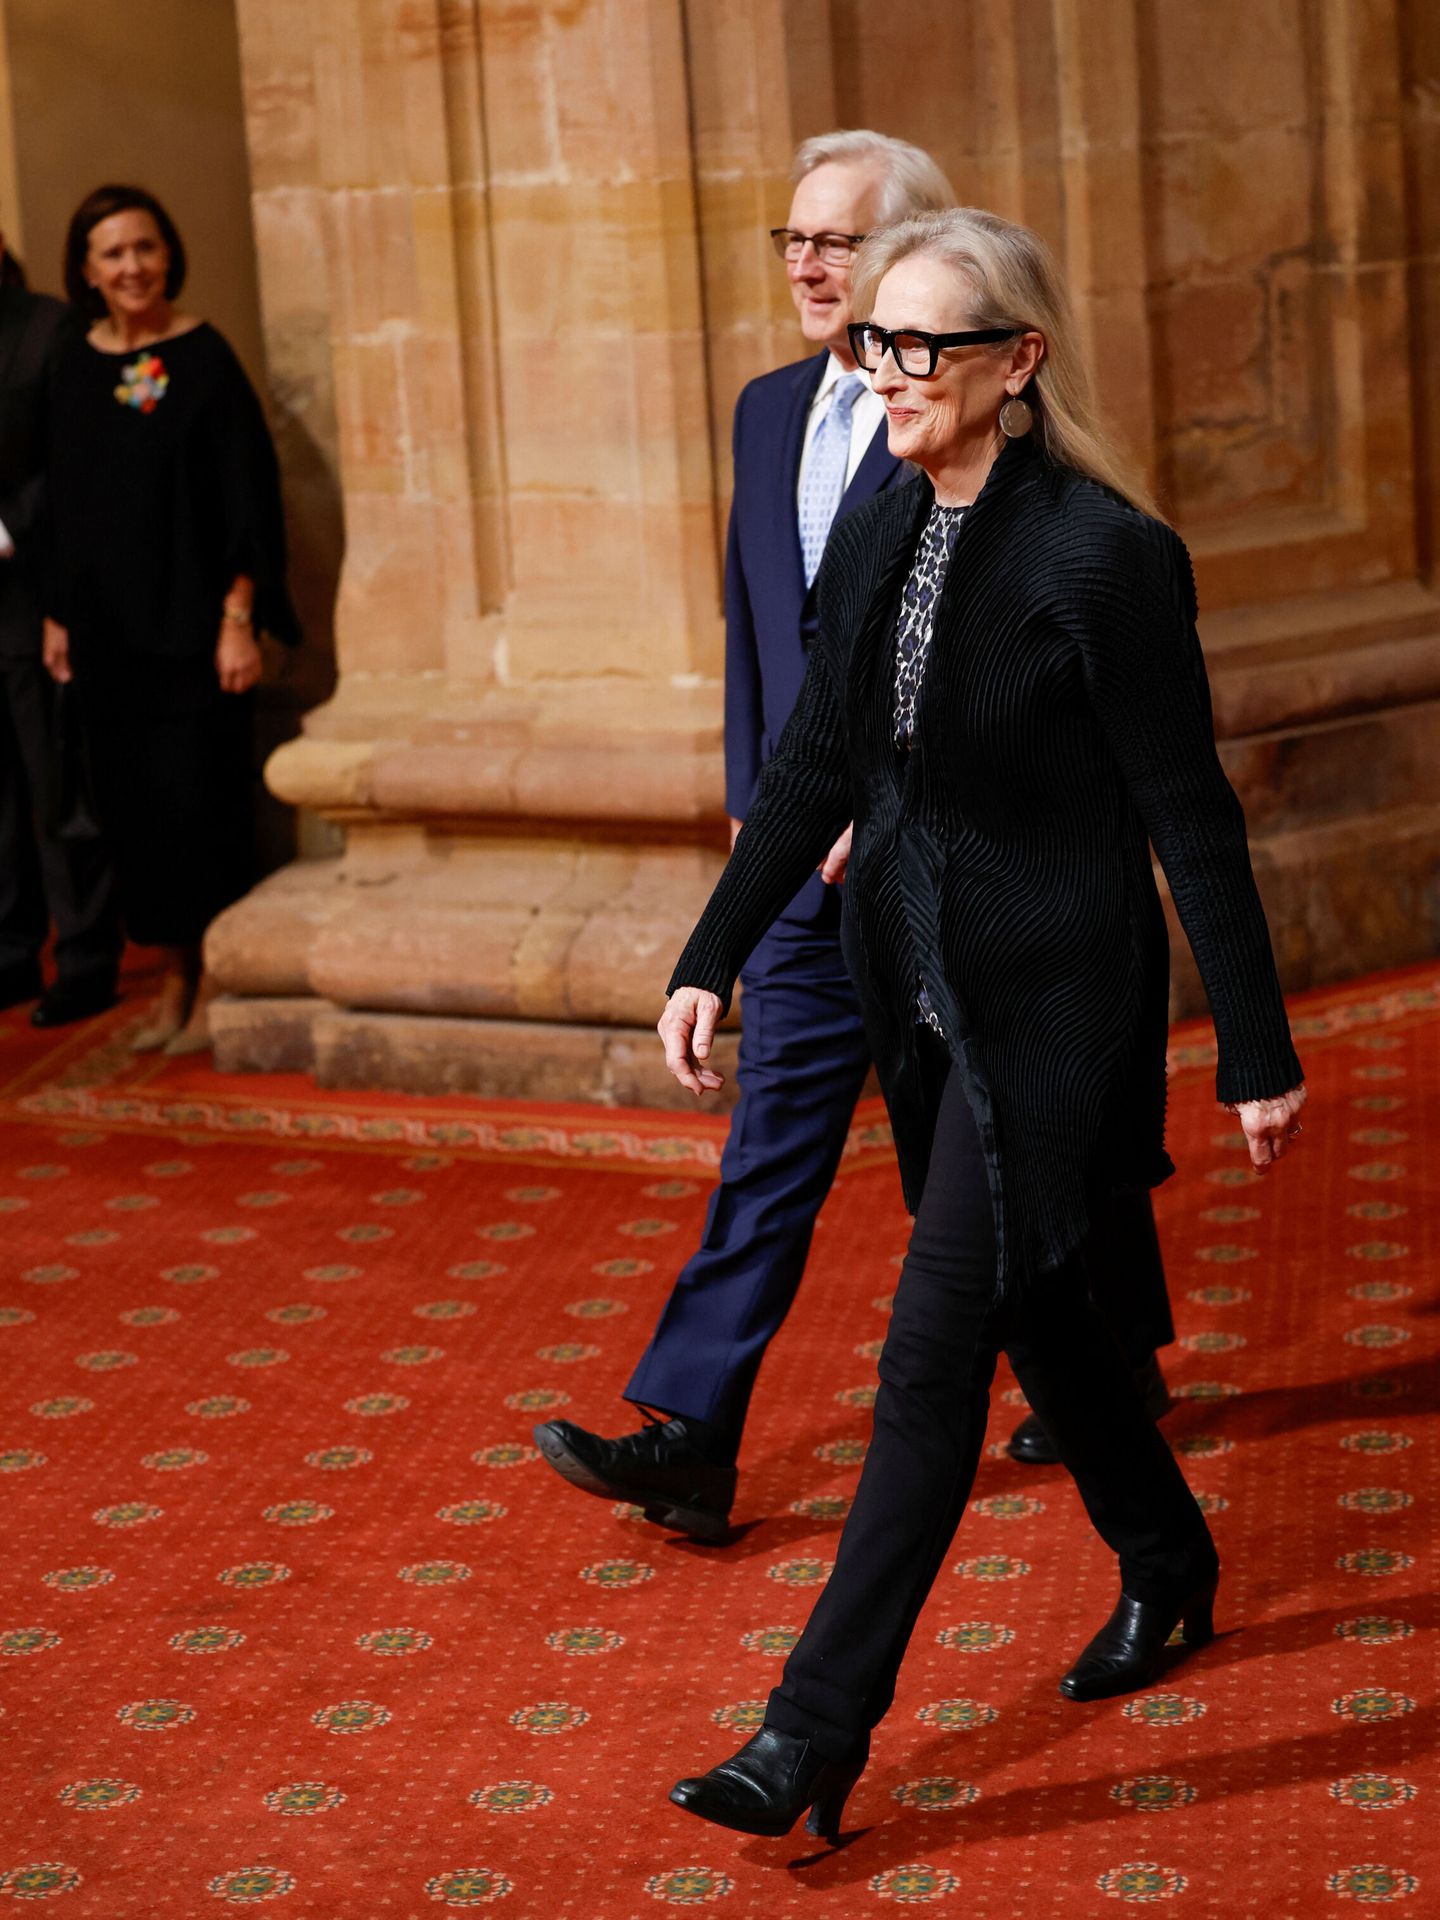 U.S. actor Meryl Streep arrives to a medals ceremony ahead of the Princess of Asturias awards, in Oviedo,Spain October 20, 2023. REUTERS Vincent West